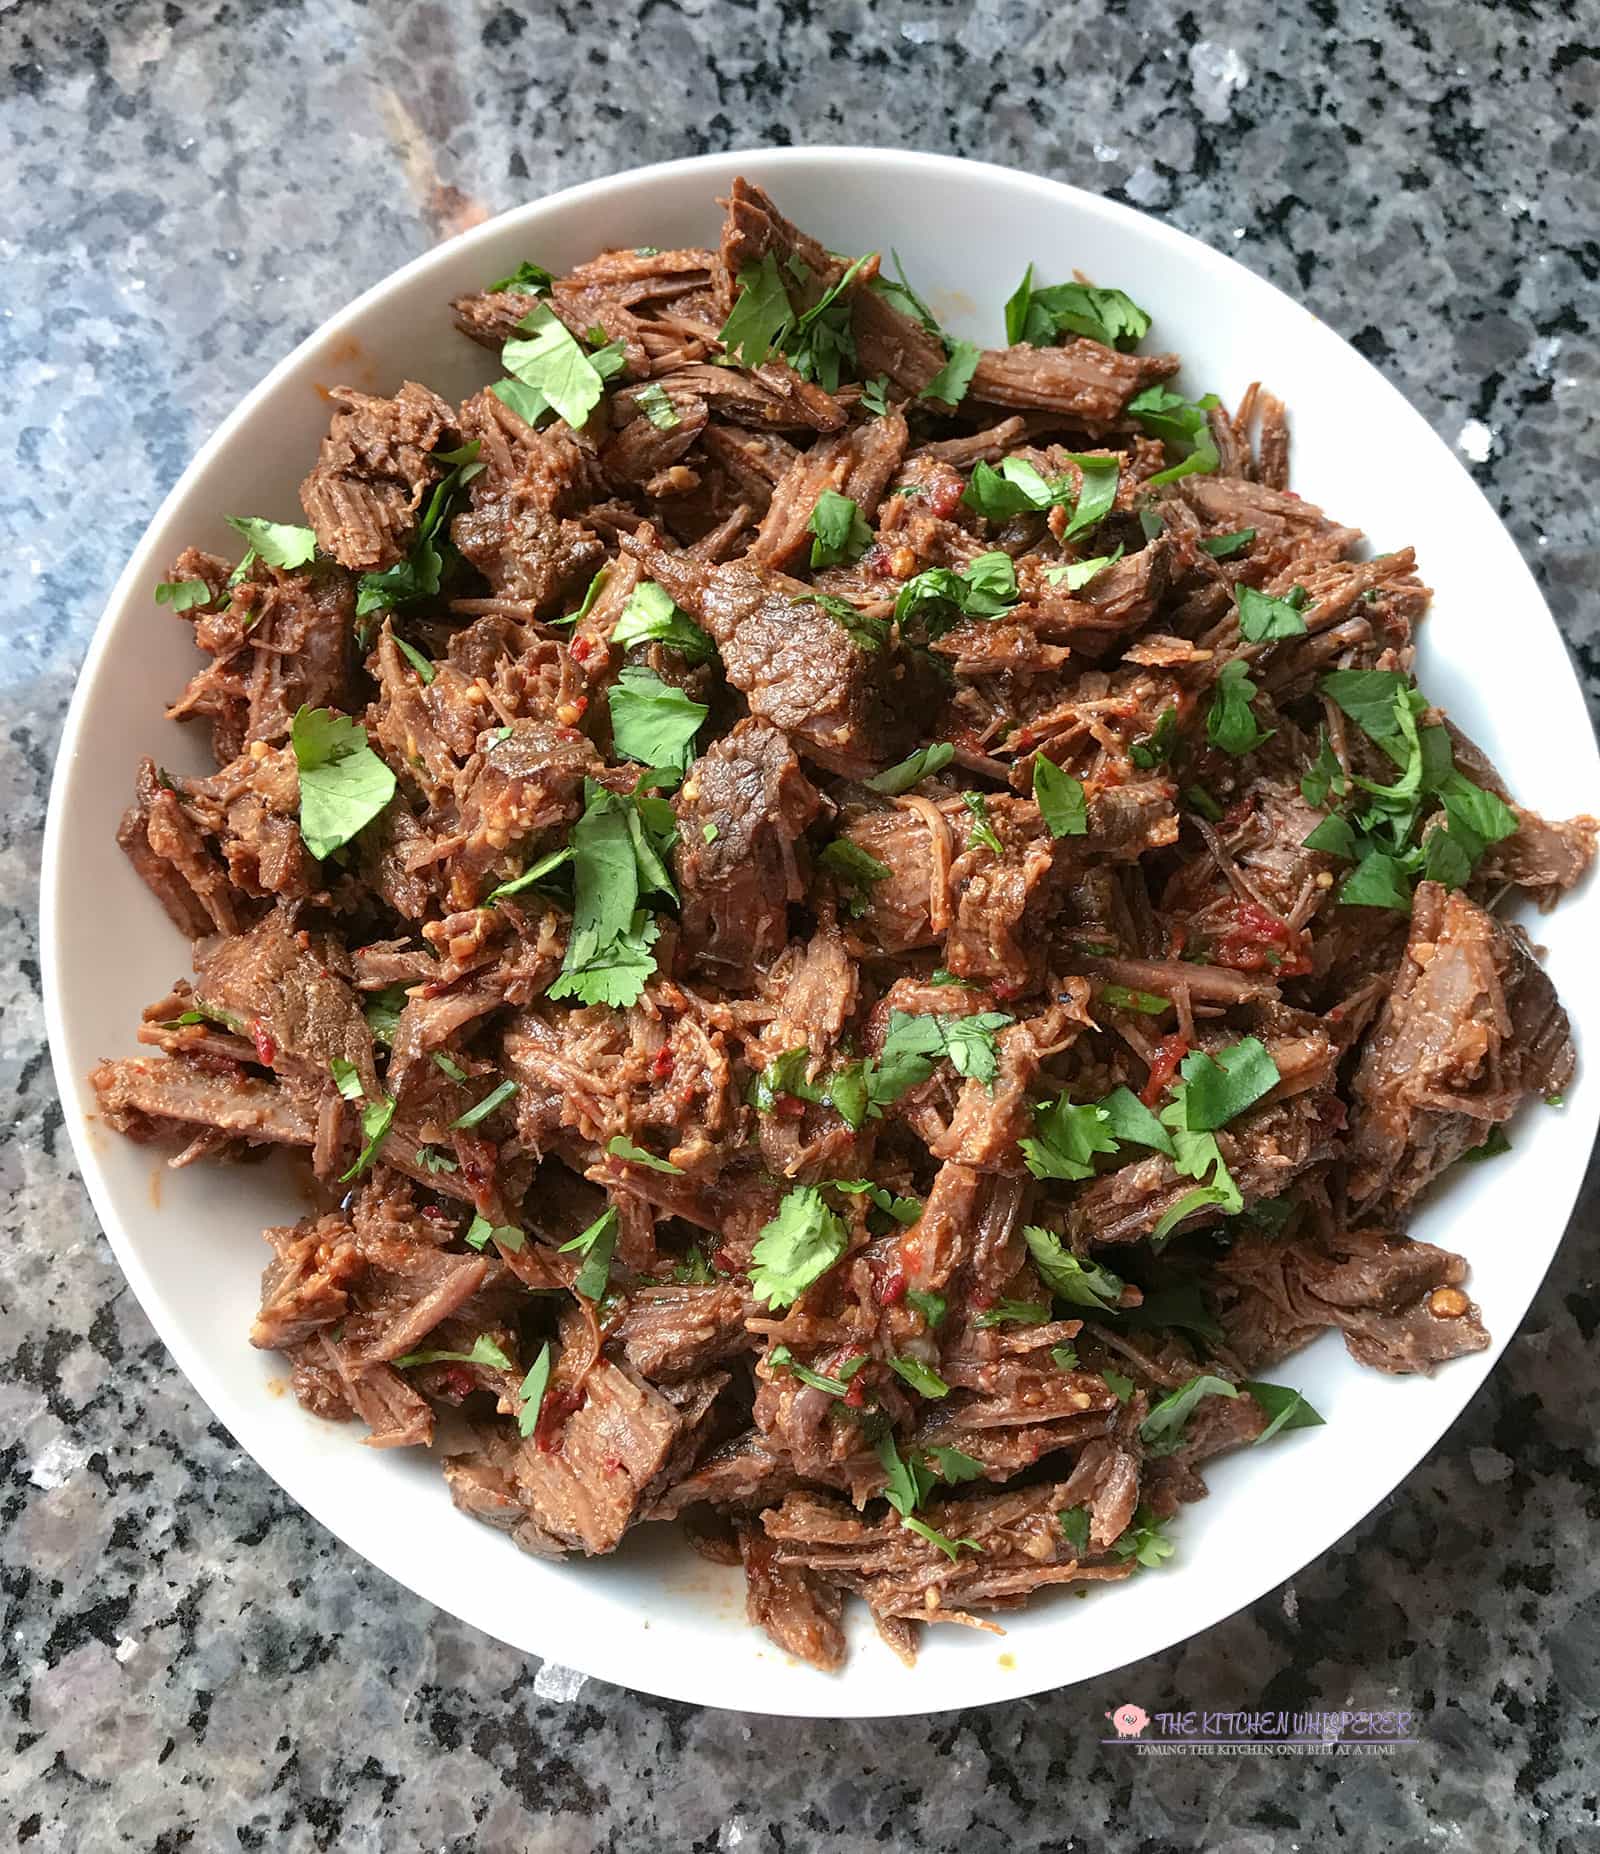 Pin to save this Instant Pot Barbacoa Beef recipe!